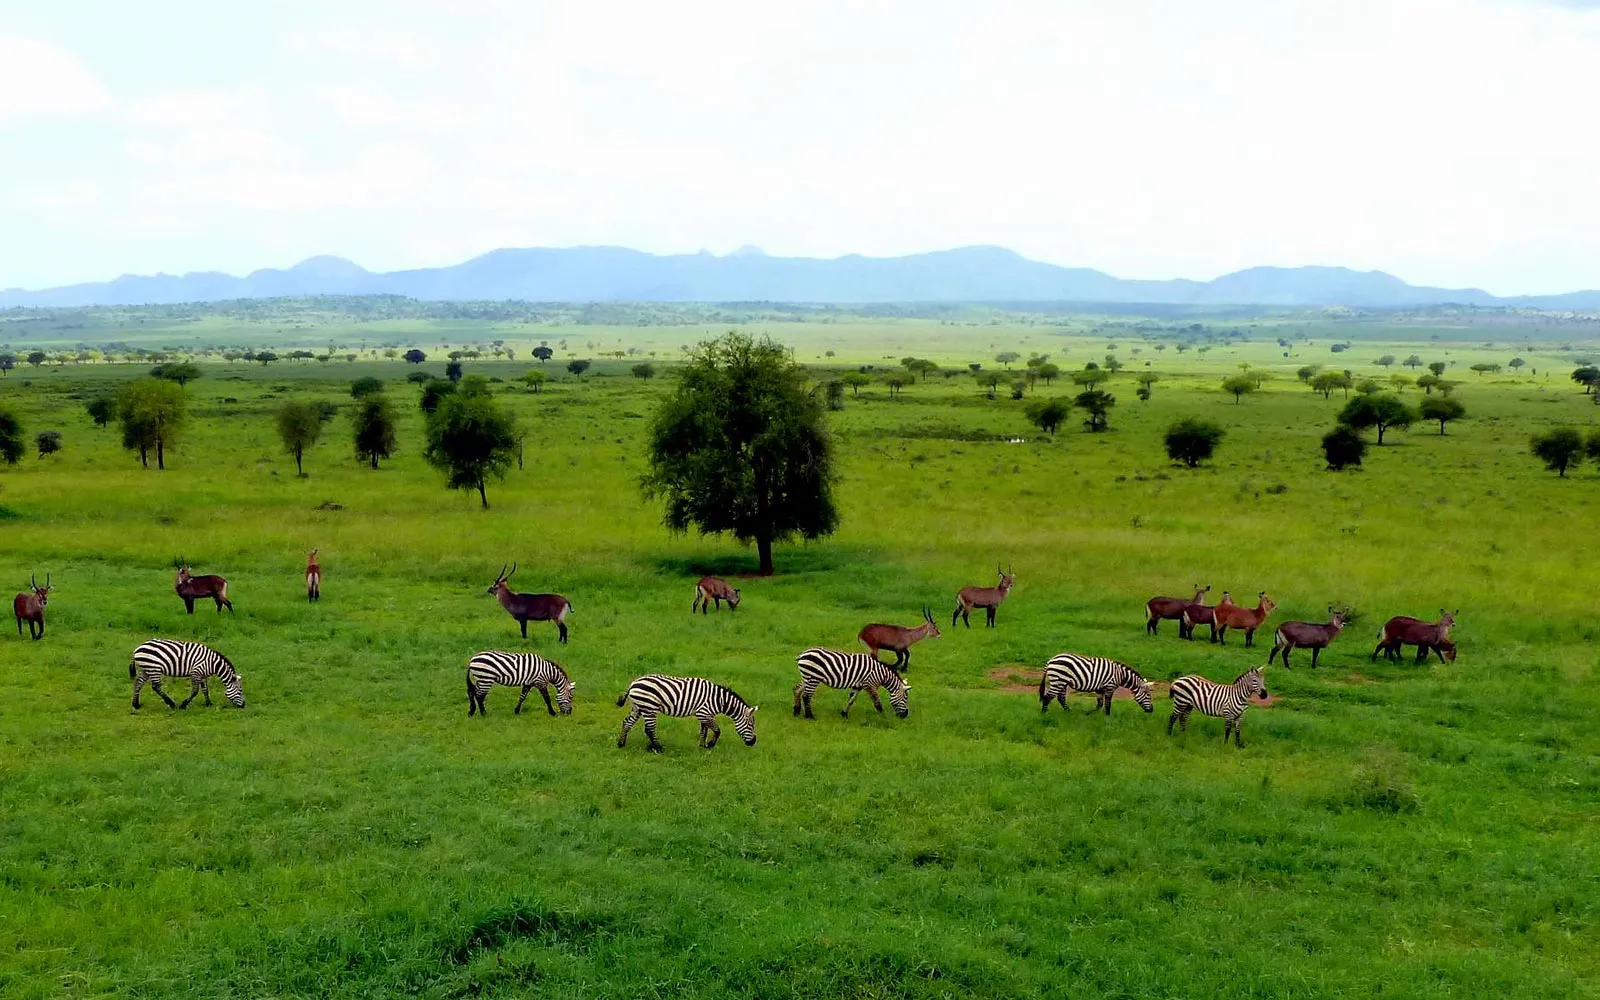 CONTINUE TO KIDEPO NATIONAL PARK